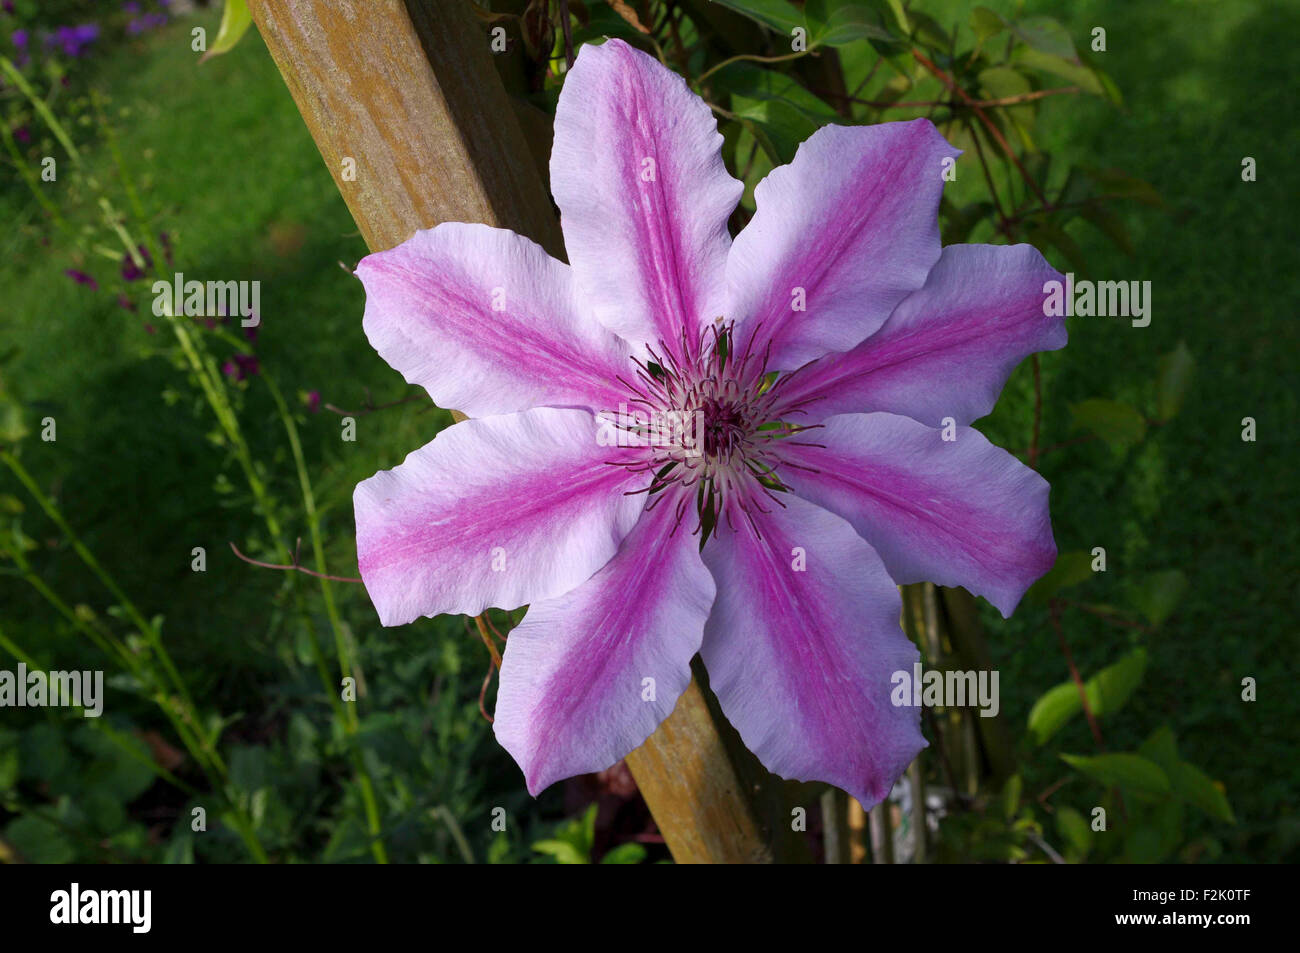 Single large flowered clematis bloom growing in garden. Stock Photo